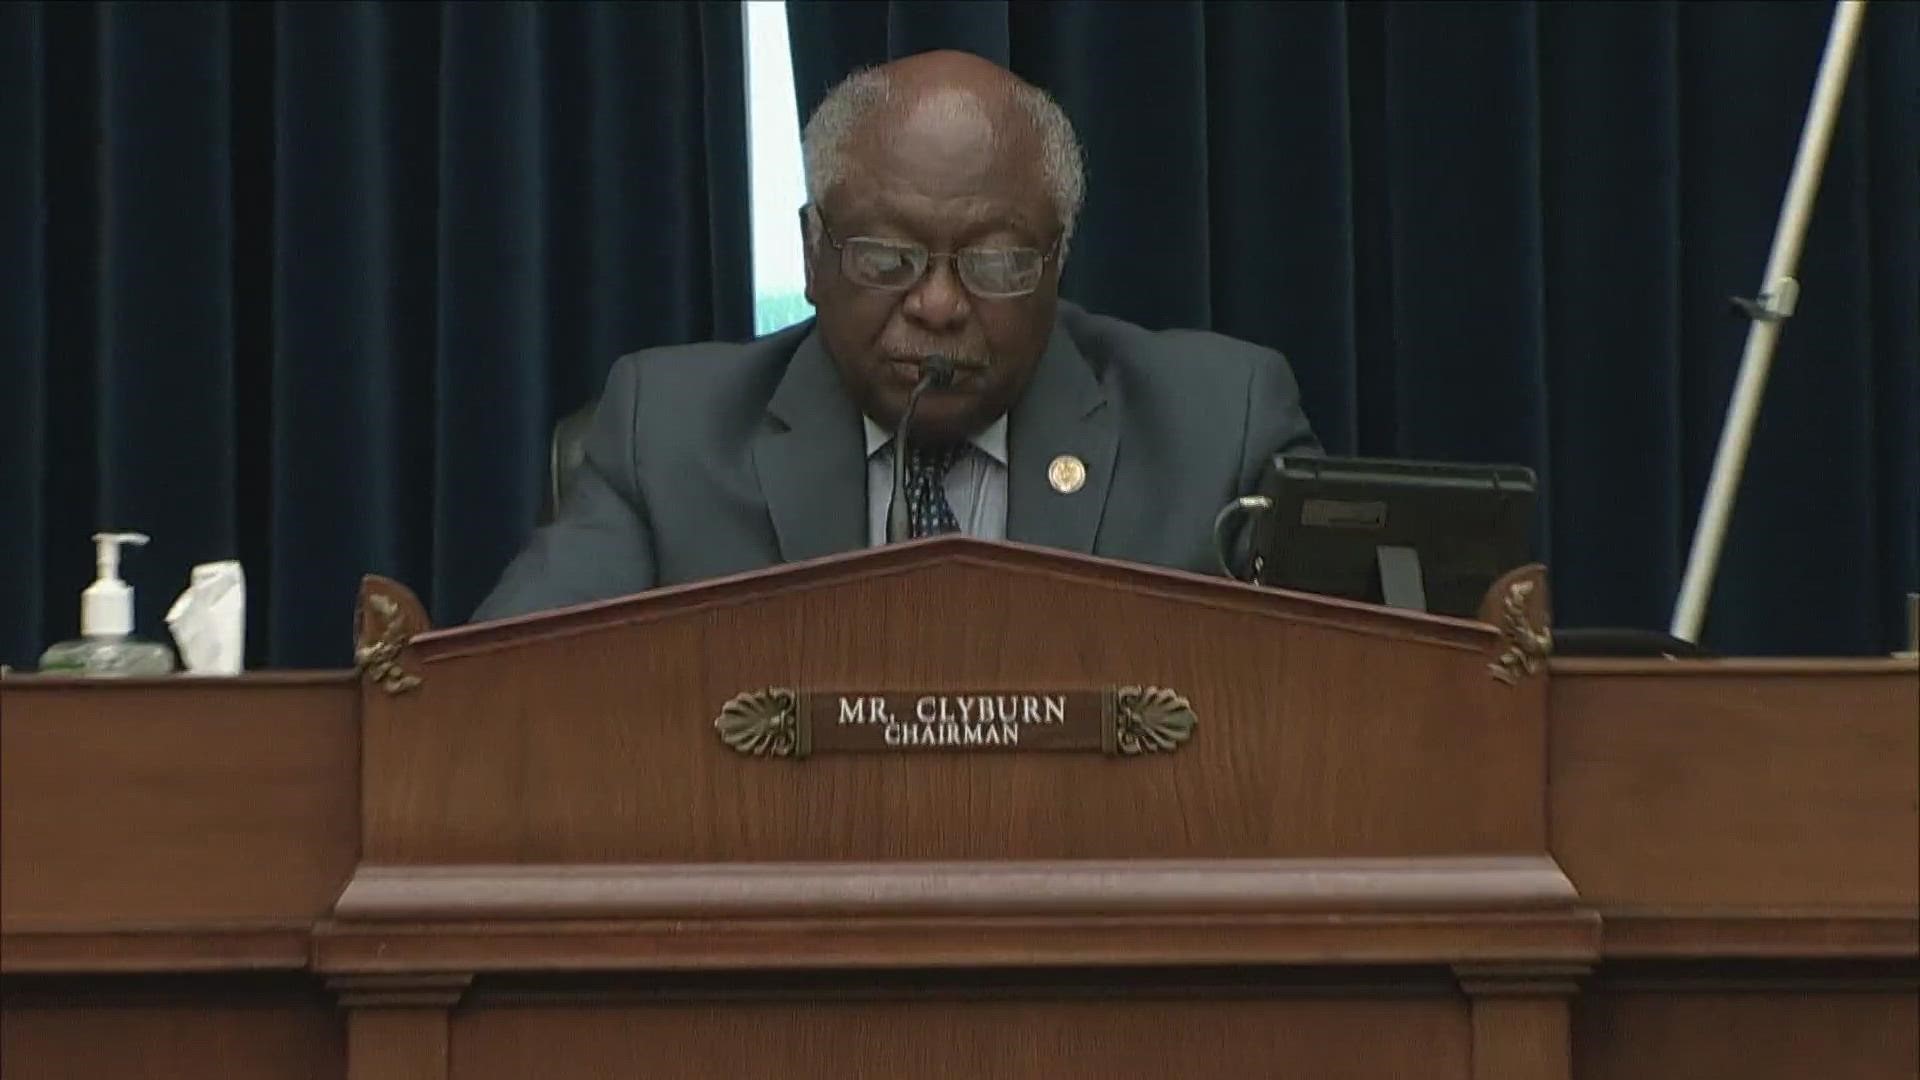 Ahead of a House Subcomittee hearing with Dr. Anthony Fauci, Dr. Robert Redfield and Brett Giroir, Rep. Jim Clyburn and Rep. Steve Scalise provide opening remarks.